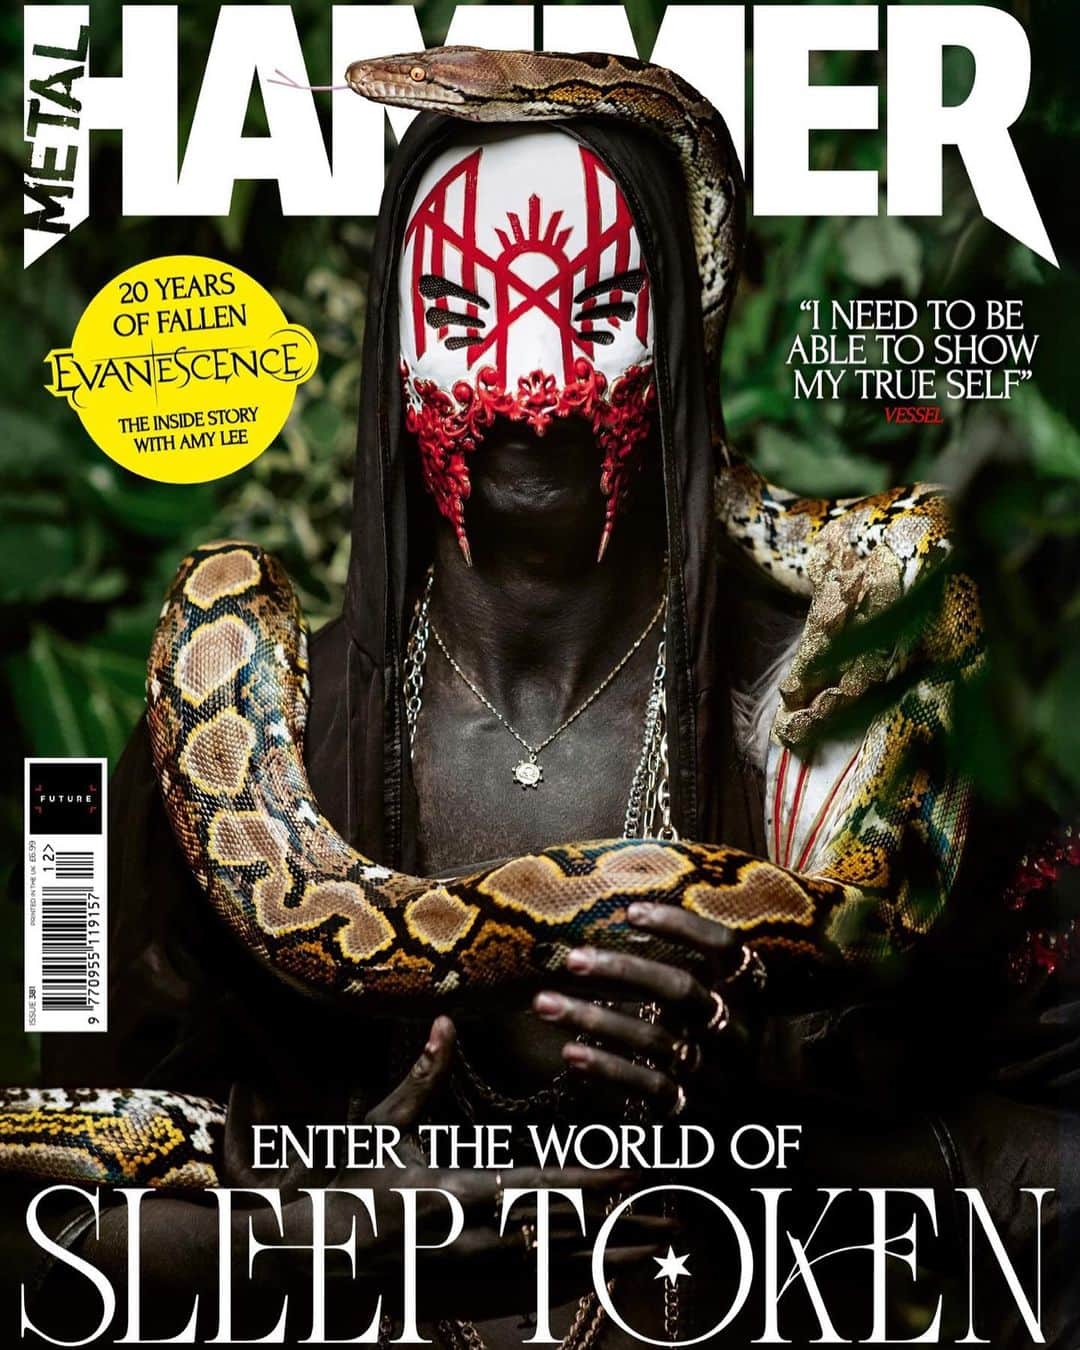 METAL HAMMERのインスタグラム：「The most talked about metal band of 2023. The world’s biggest heavy music mag. Sleep Token return to the cover of Metal Hammer - on sale now. Find out more via the link in our bio   📸: Andy Ford   #sleeptoken #sleeptokenworship #vessel #metal #heavymetal #evanescence #metalhammer #magazine #magazinecover #metalmagazine」